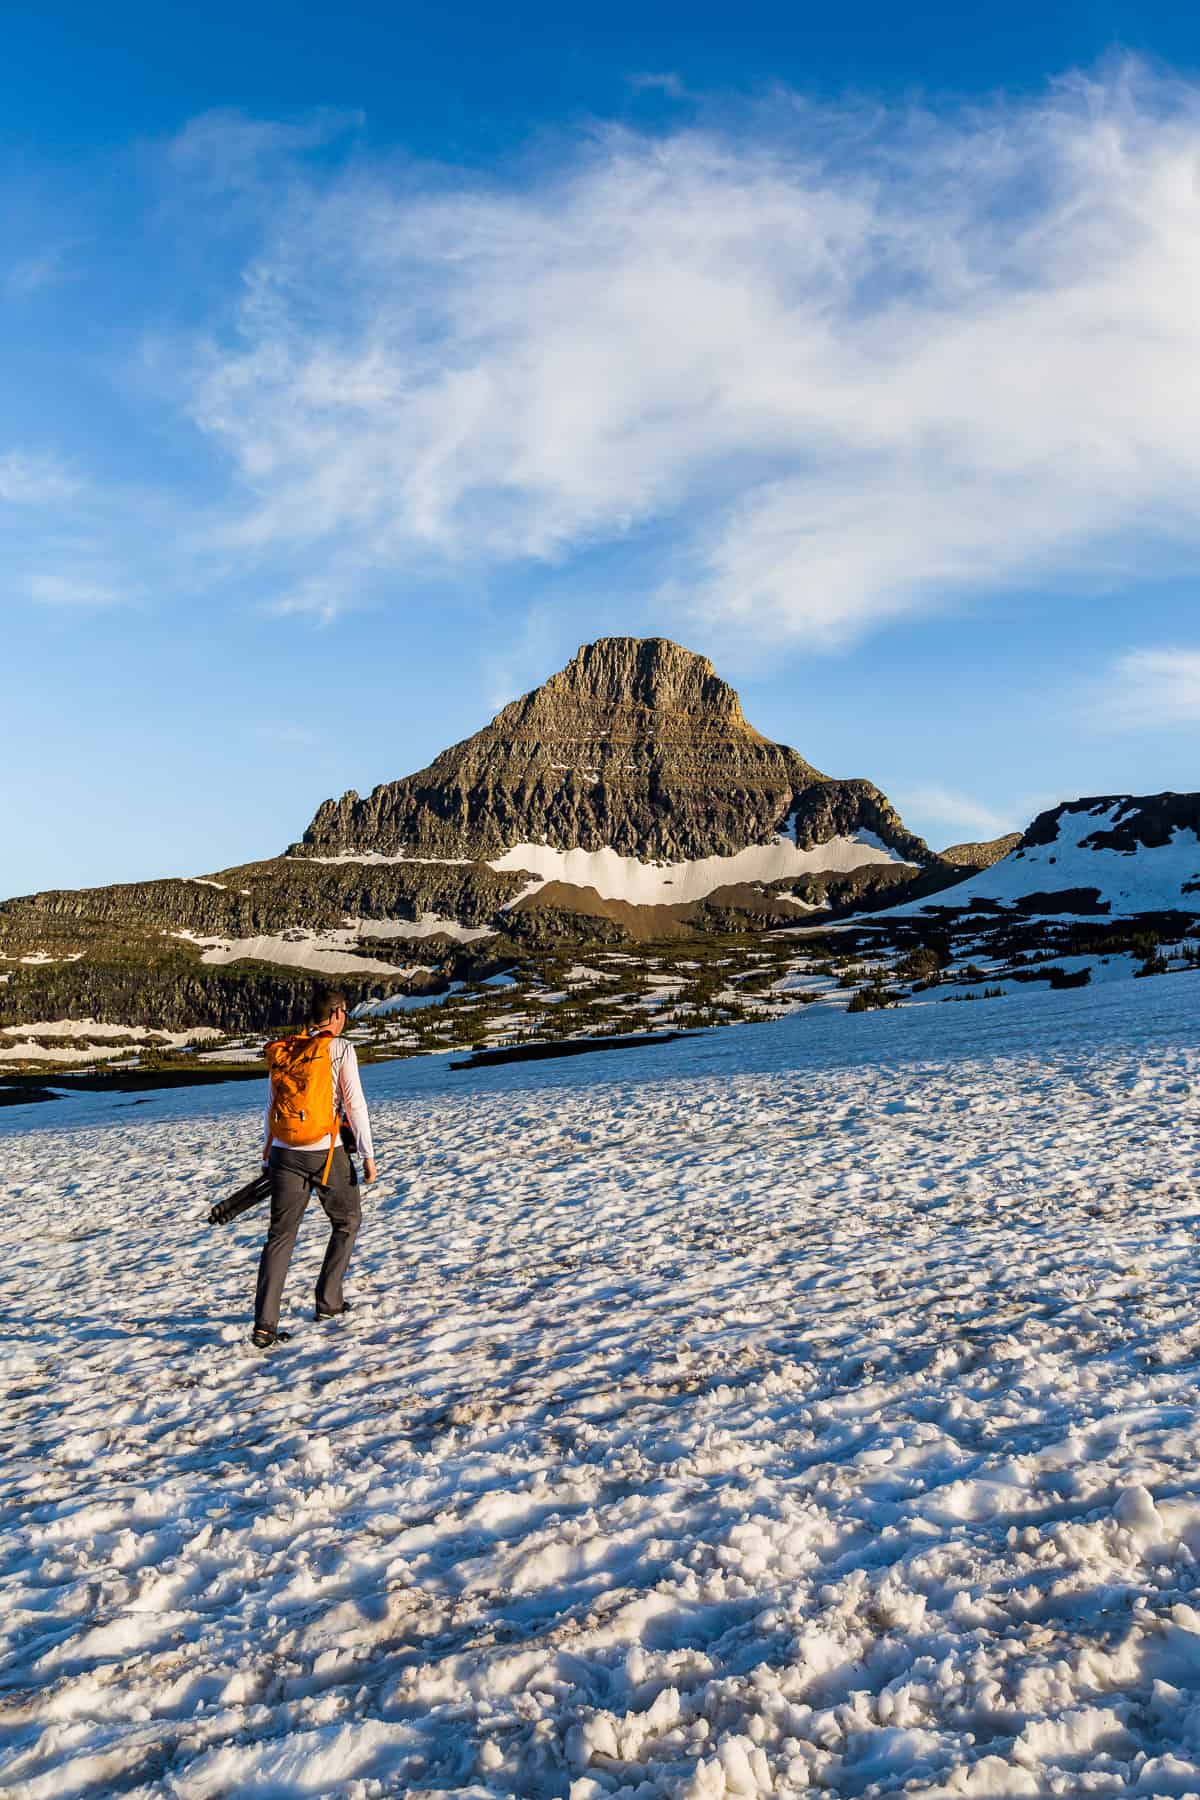 Man crossing a snow field with a mountain peak in the distance.